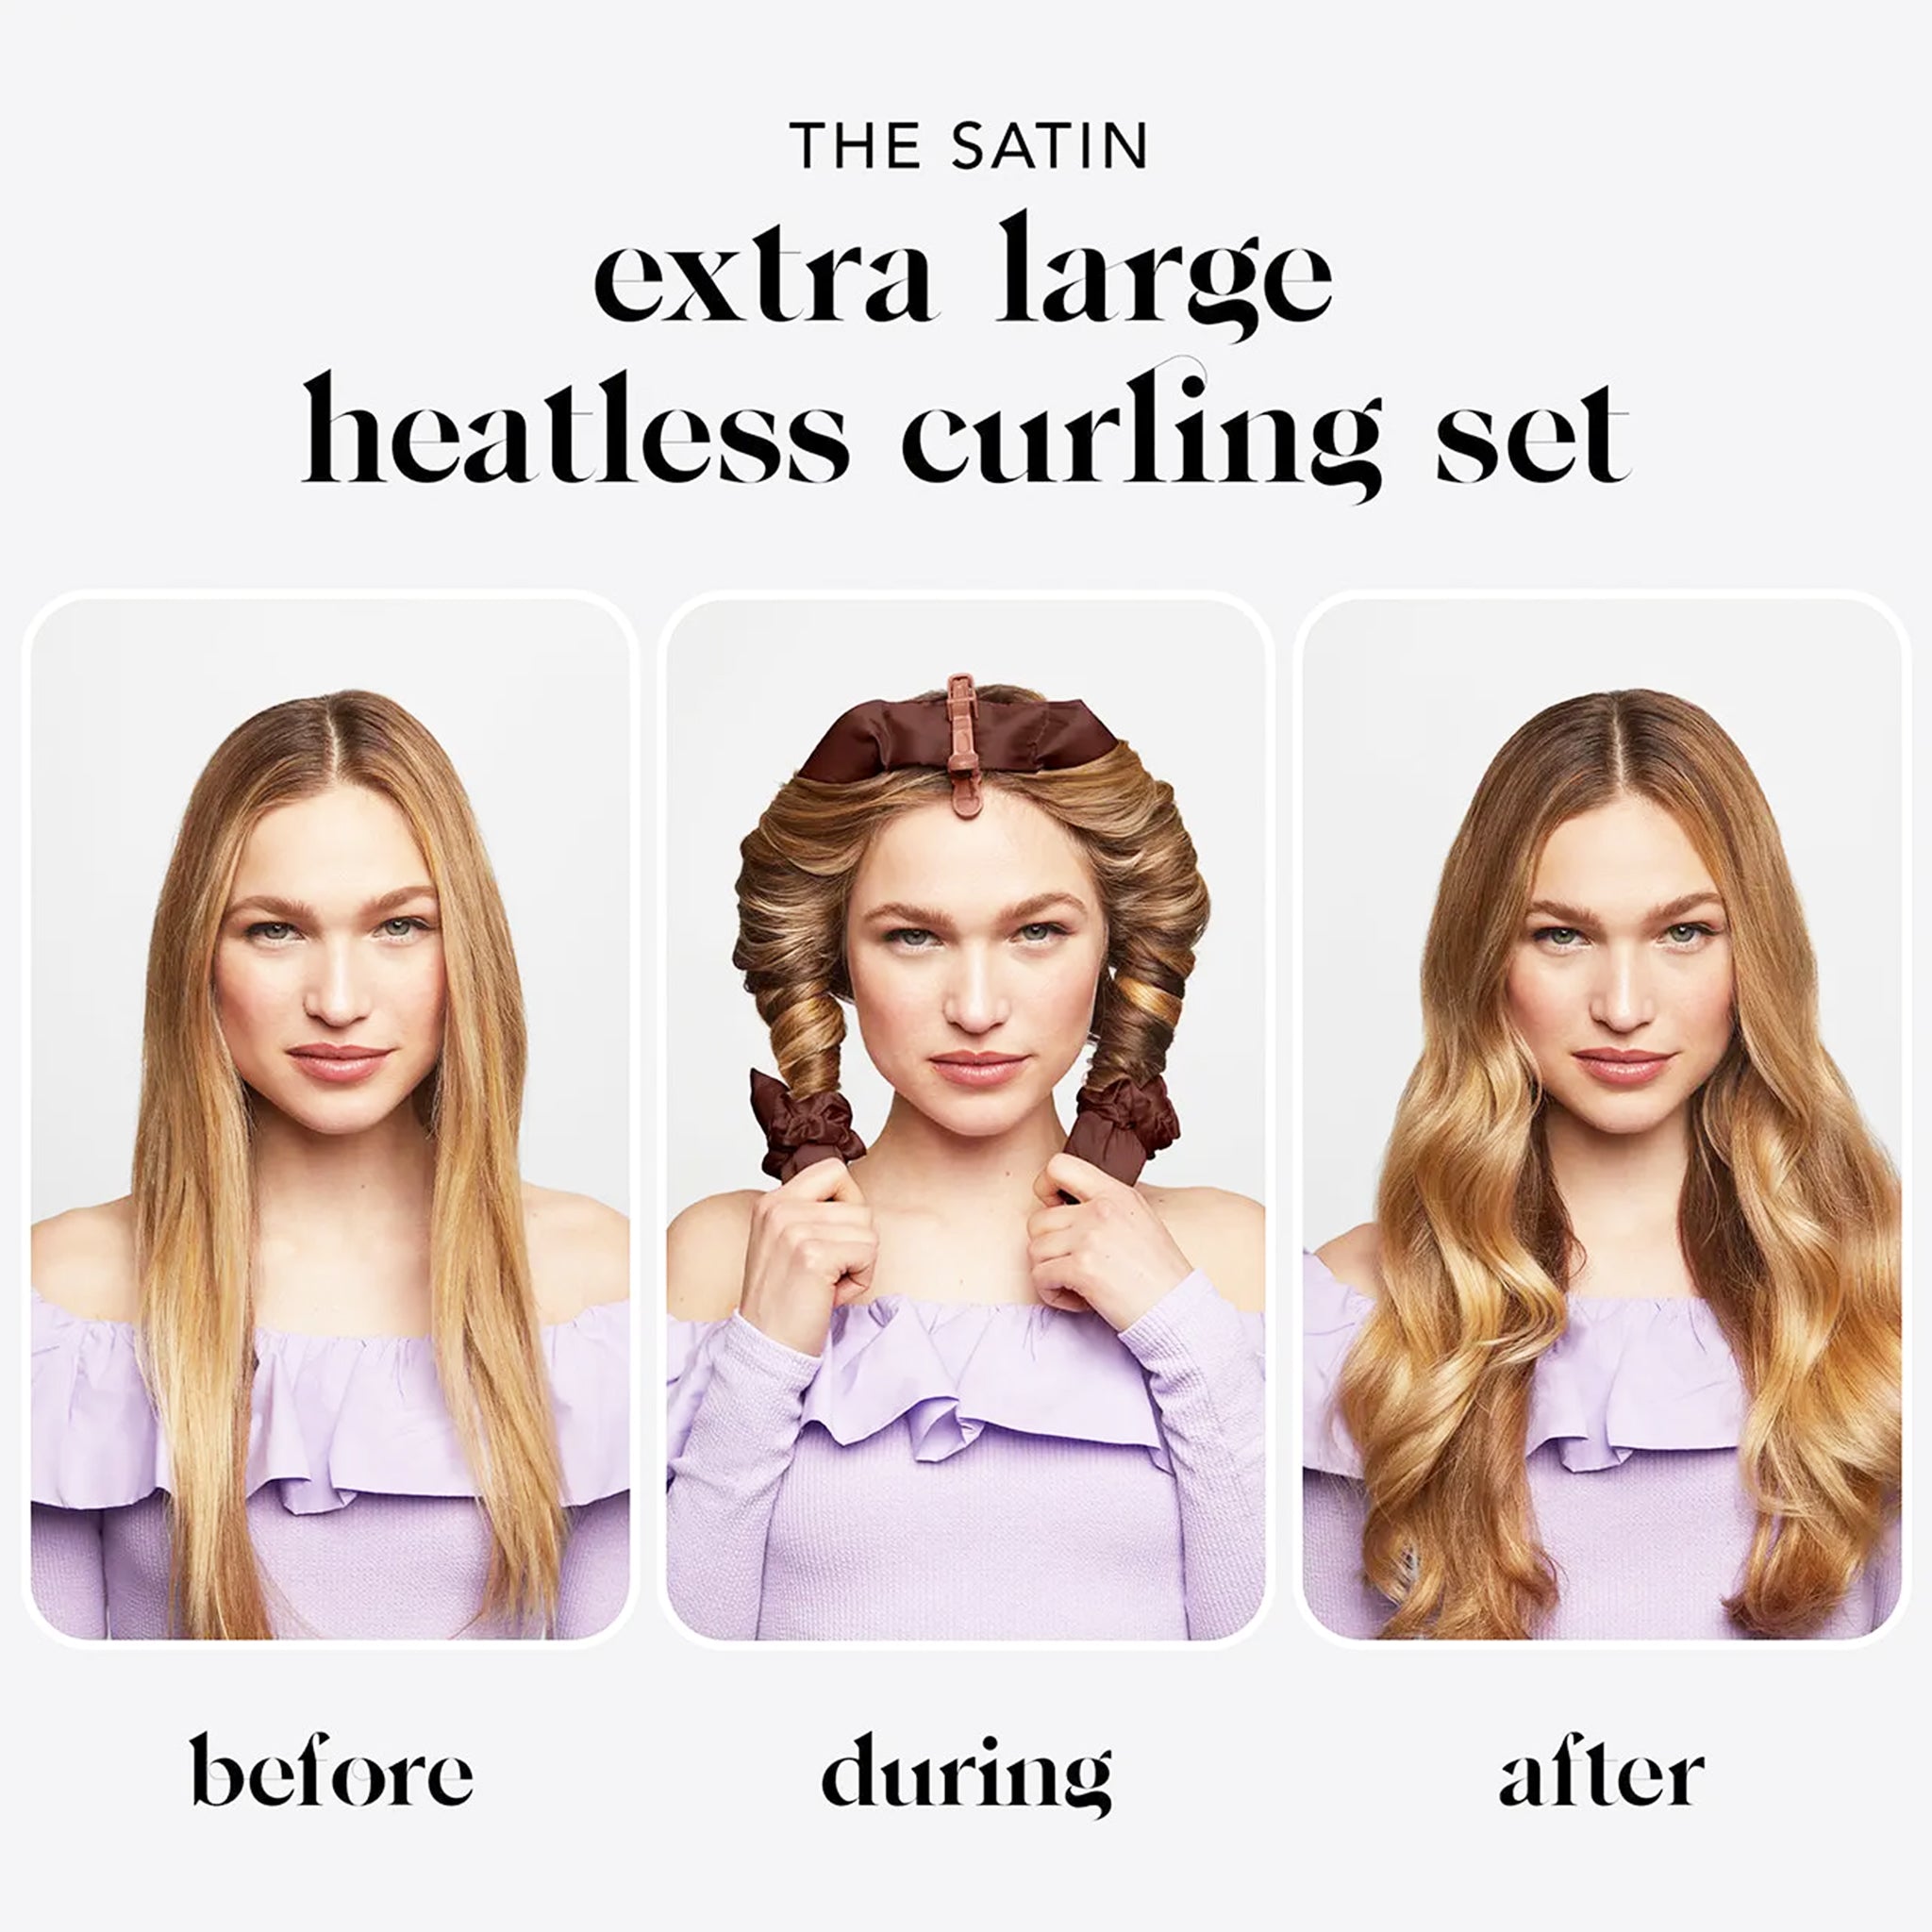 A chart showing the process of using the heatless curling set. 